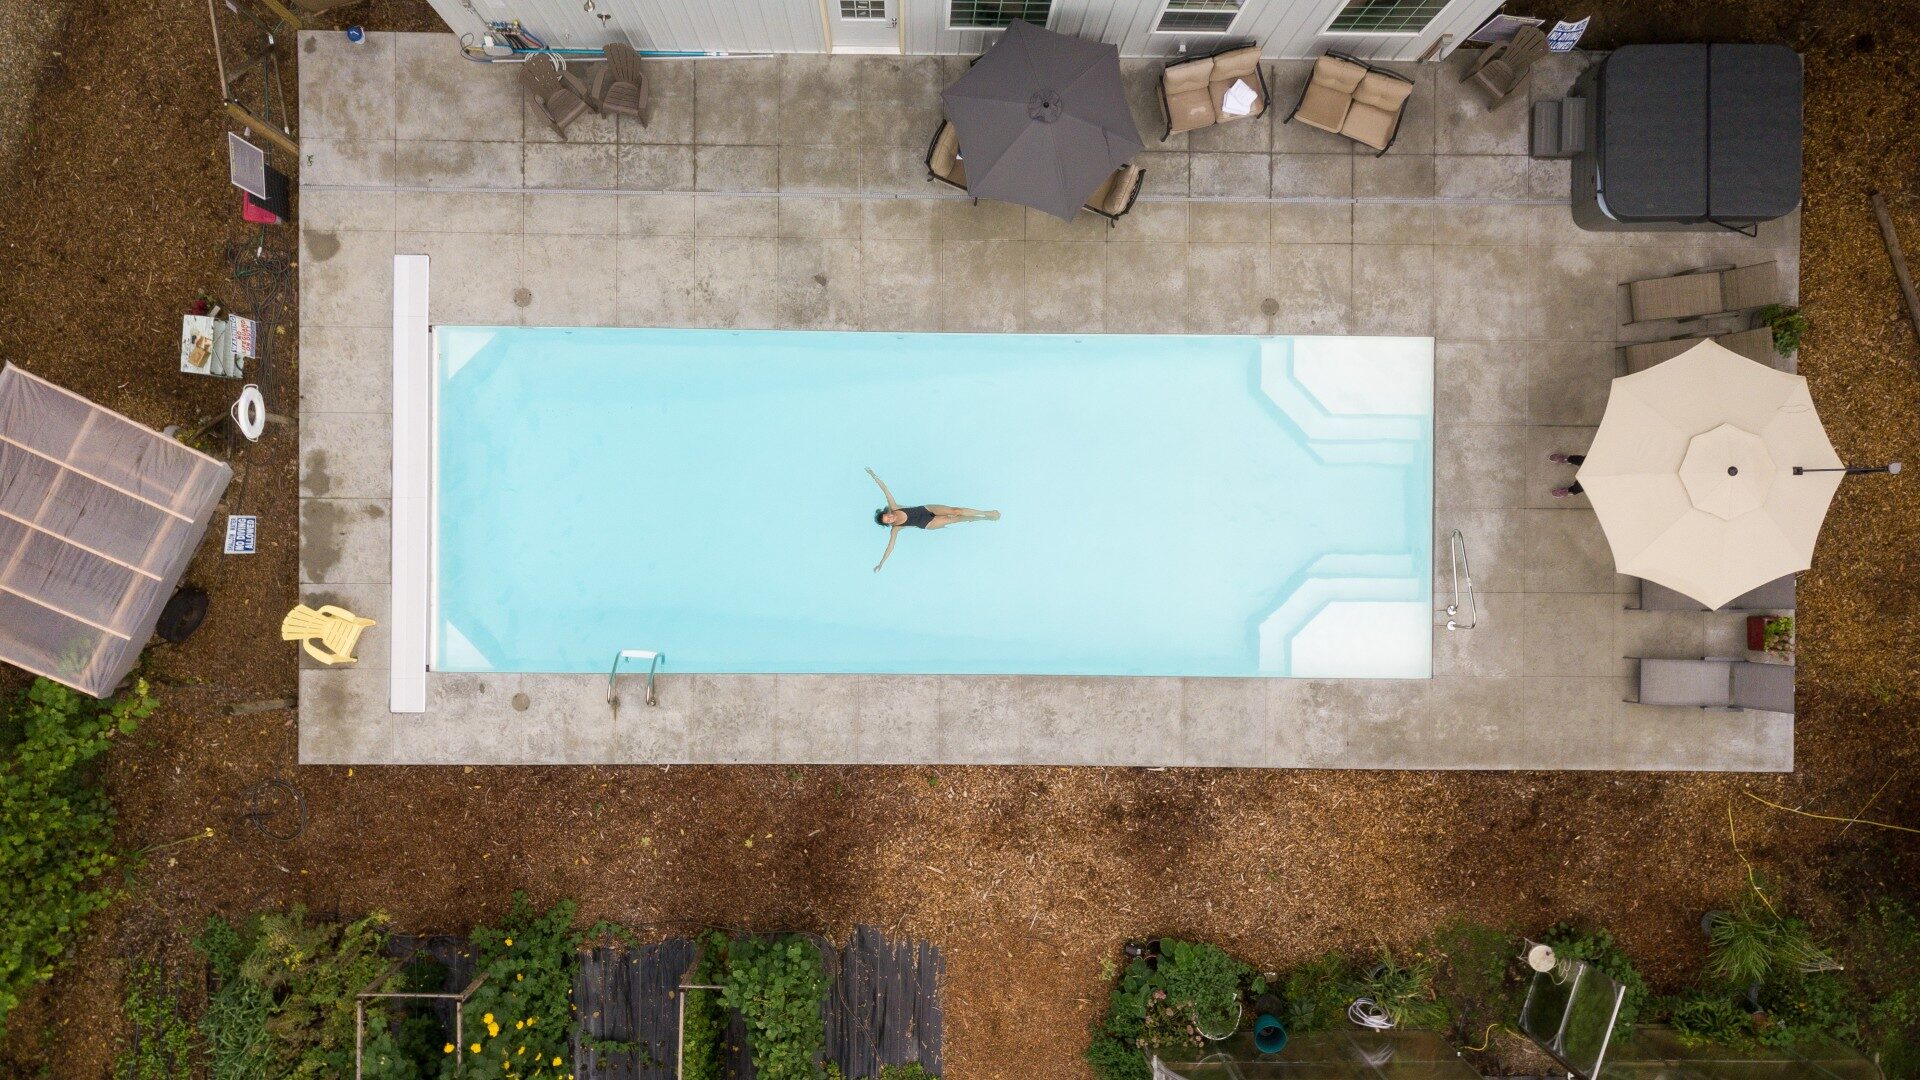 Overhead view of a large outdoor swimming pool next to a building surrounded by plants